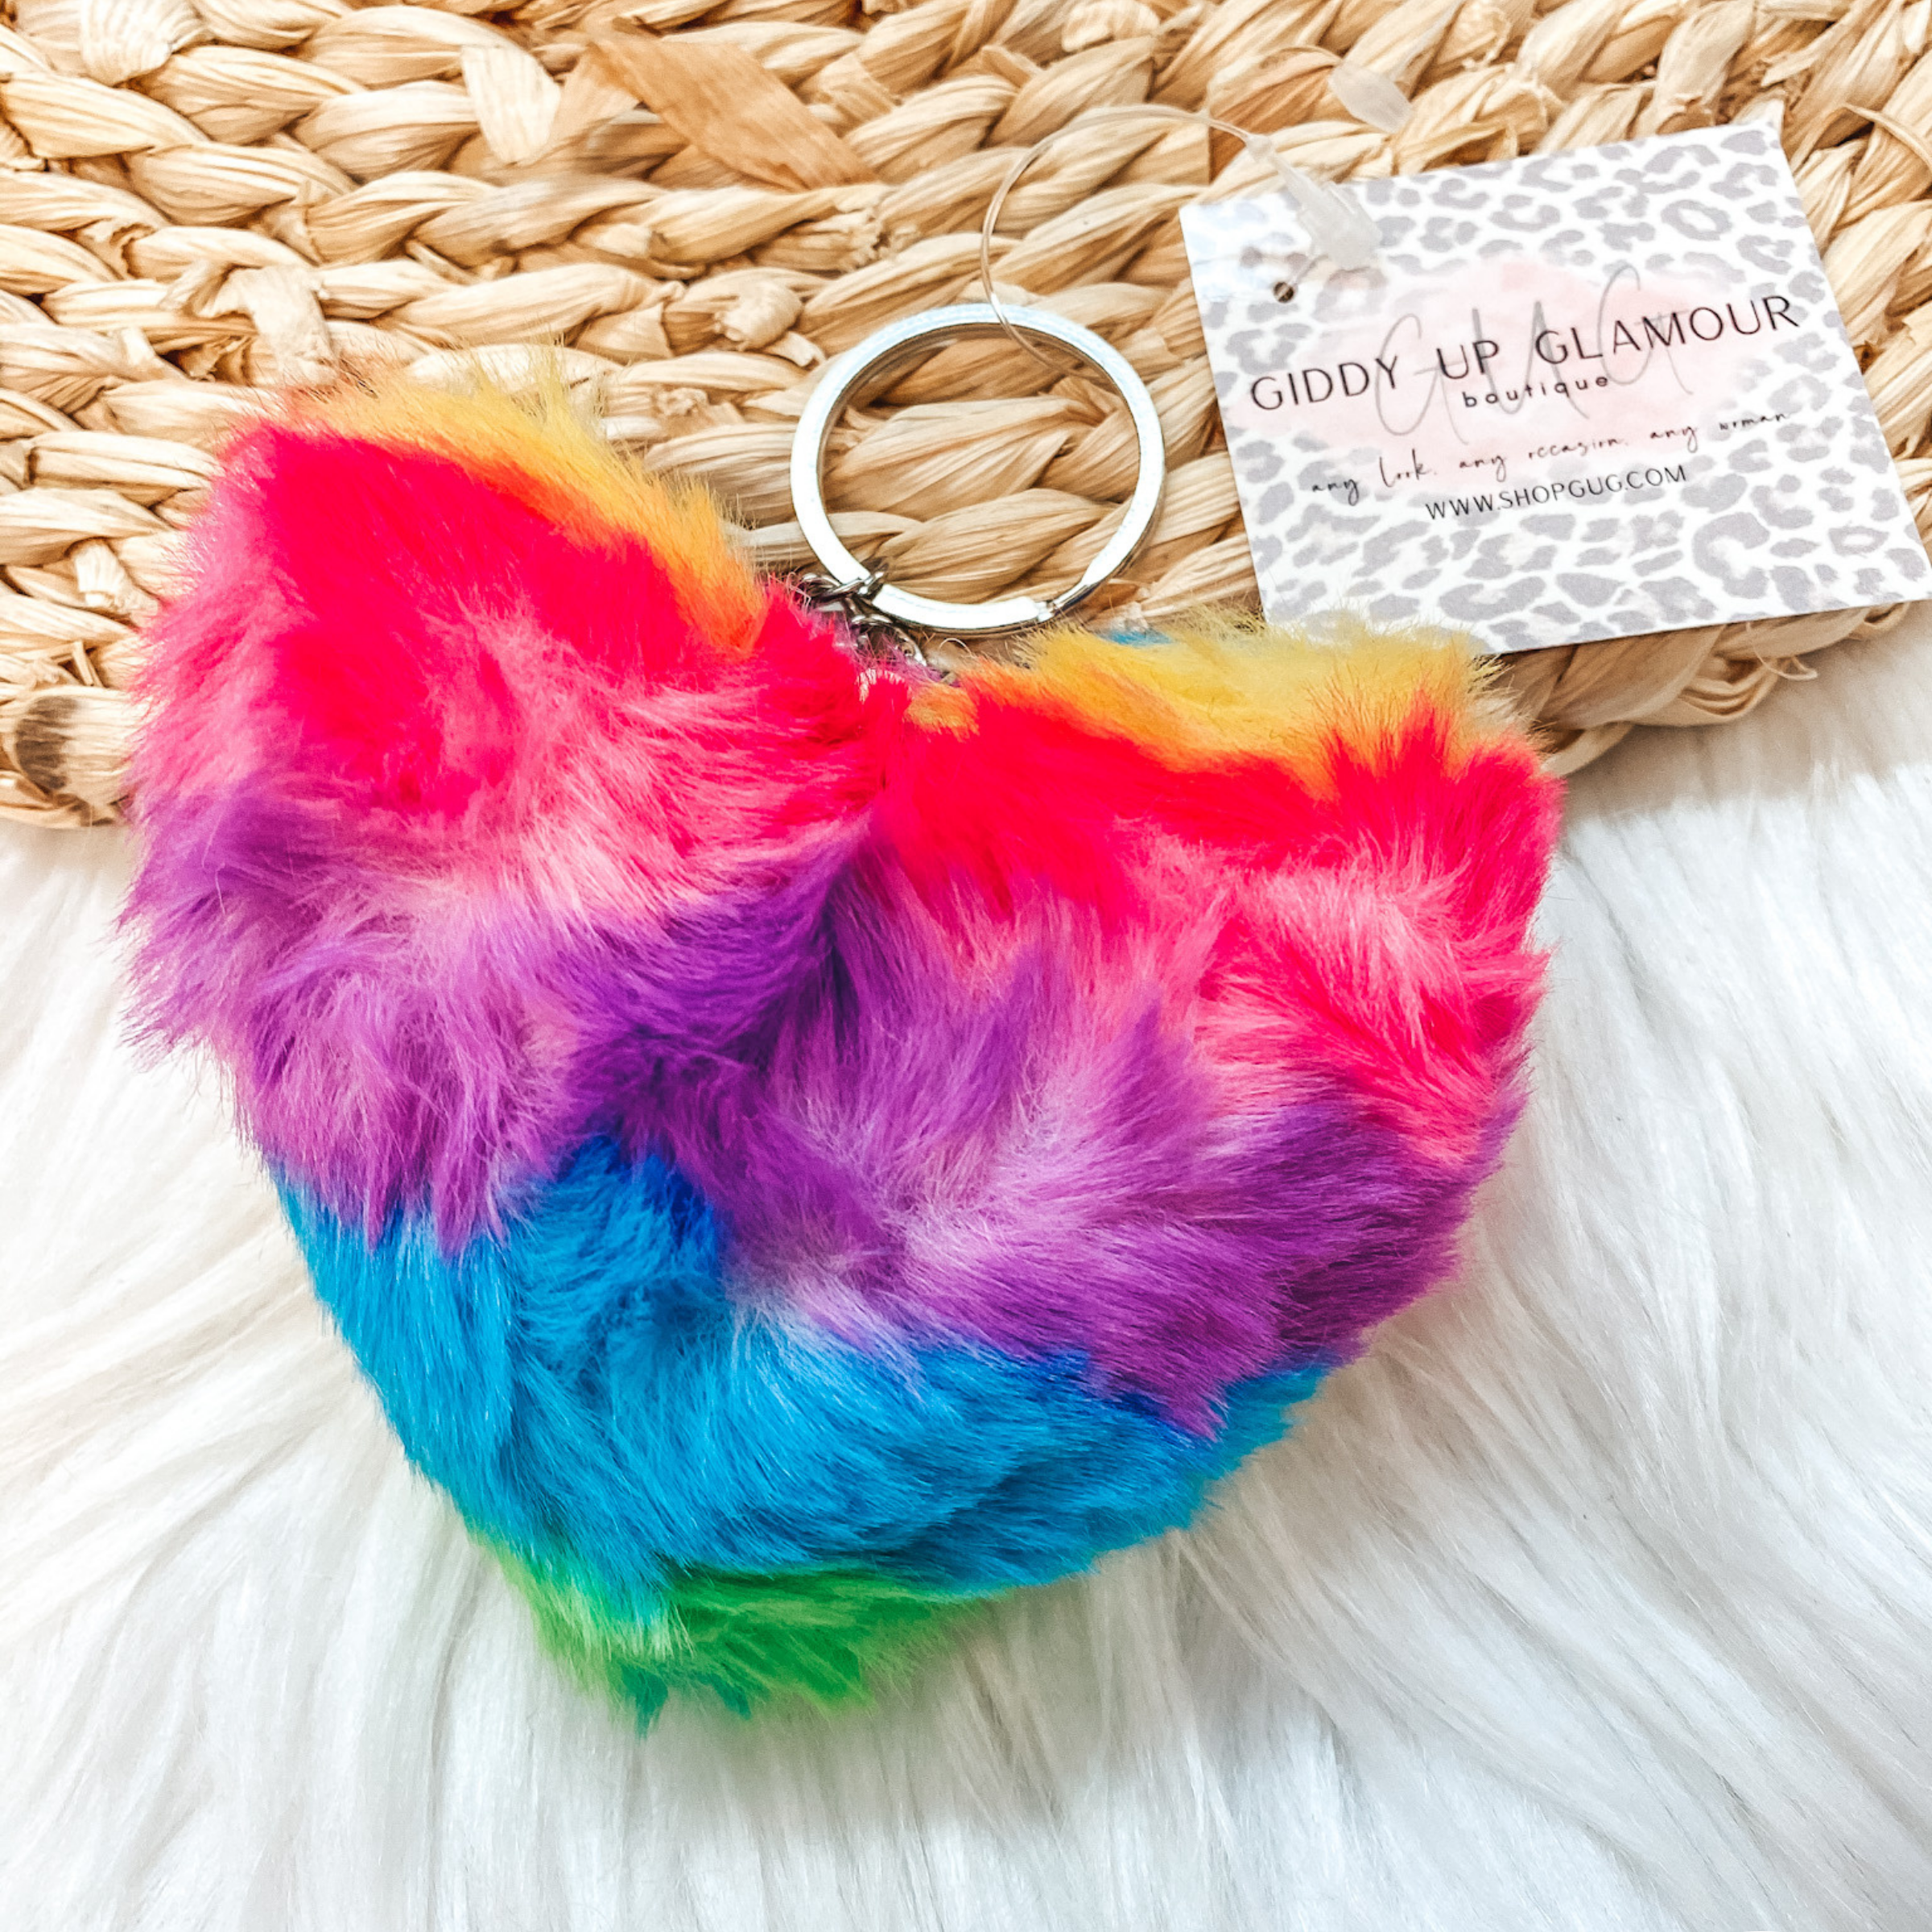 Buy 3 for $10 | Multi Color Fluffy Heart Keychain - Giddy Up Glamour Boutique